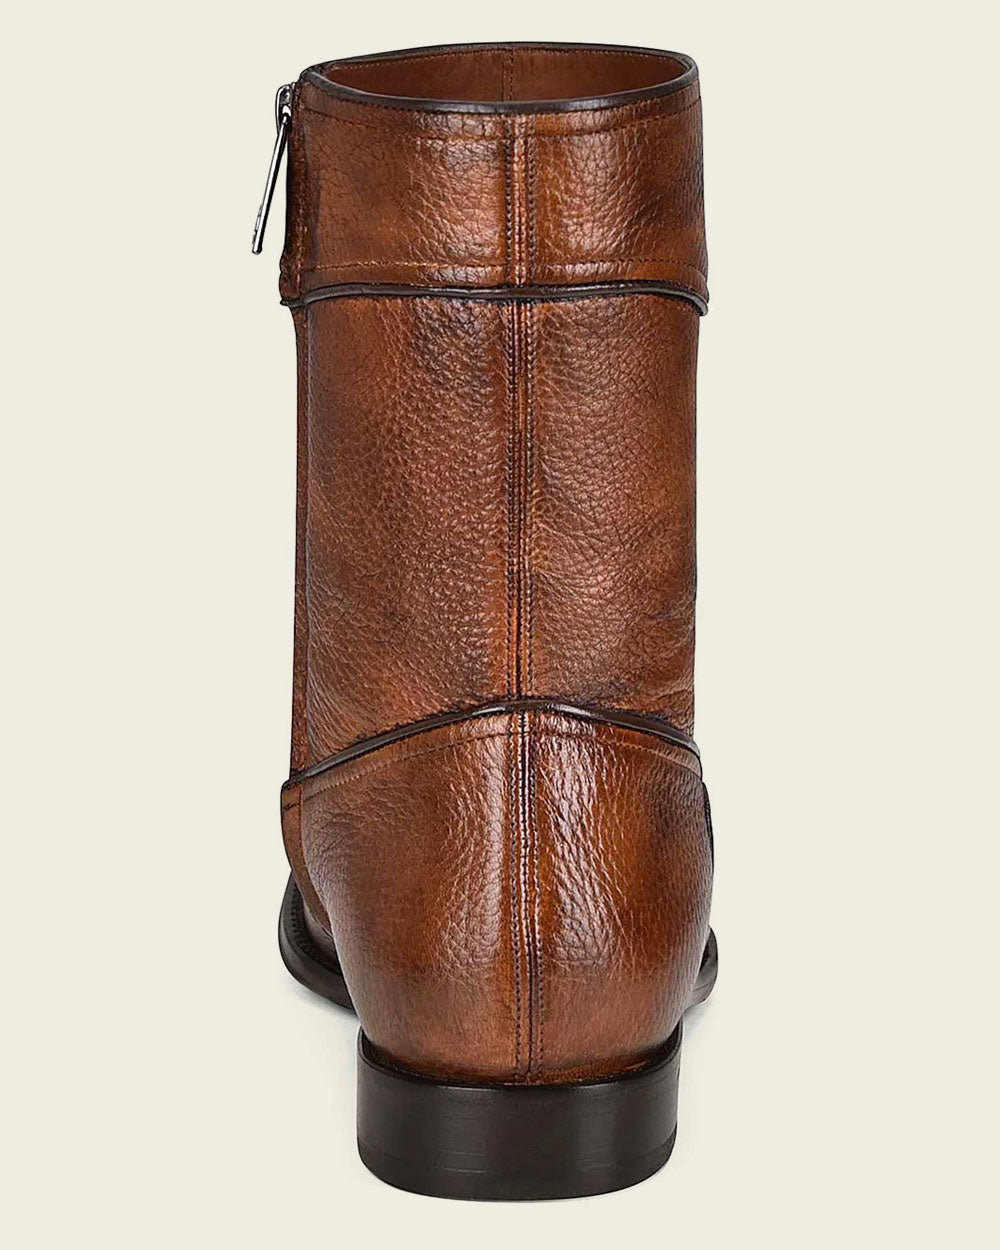 Indulge in the luxury of genuine deer leather, where softness meets adaptability. Experience comfort and style like never before with our Men's Hand-painted honey deer leather boots by franco cuadra. A footwear choice that reflects your impeccable taste and discerning lifestyle.